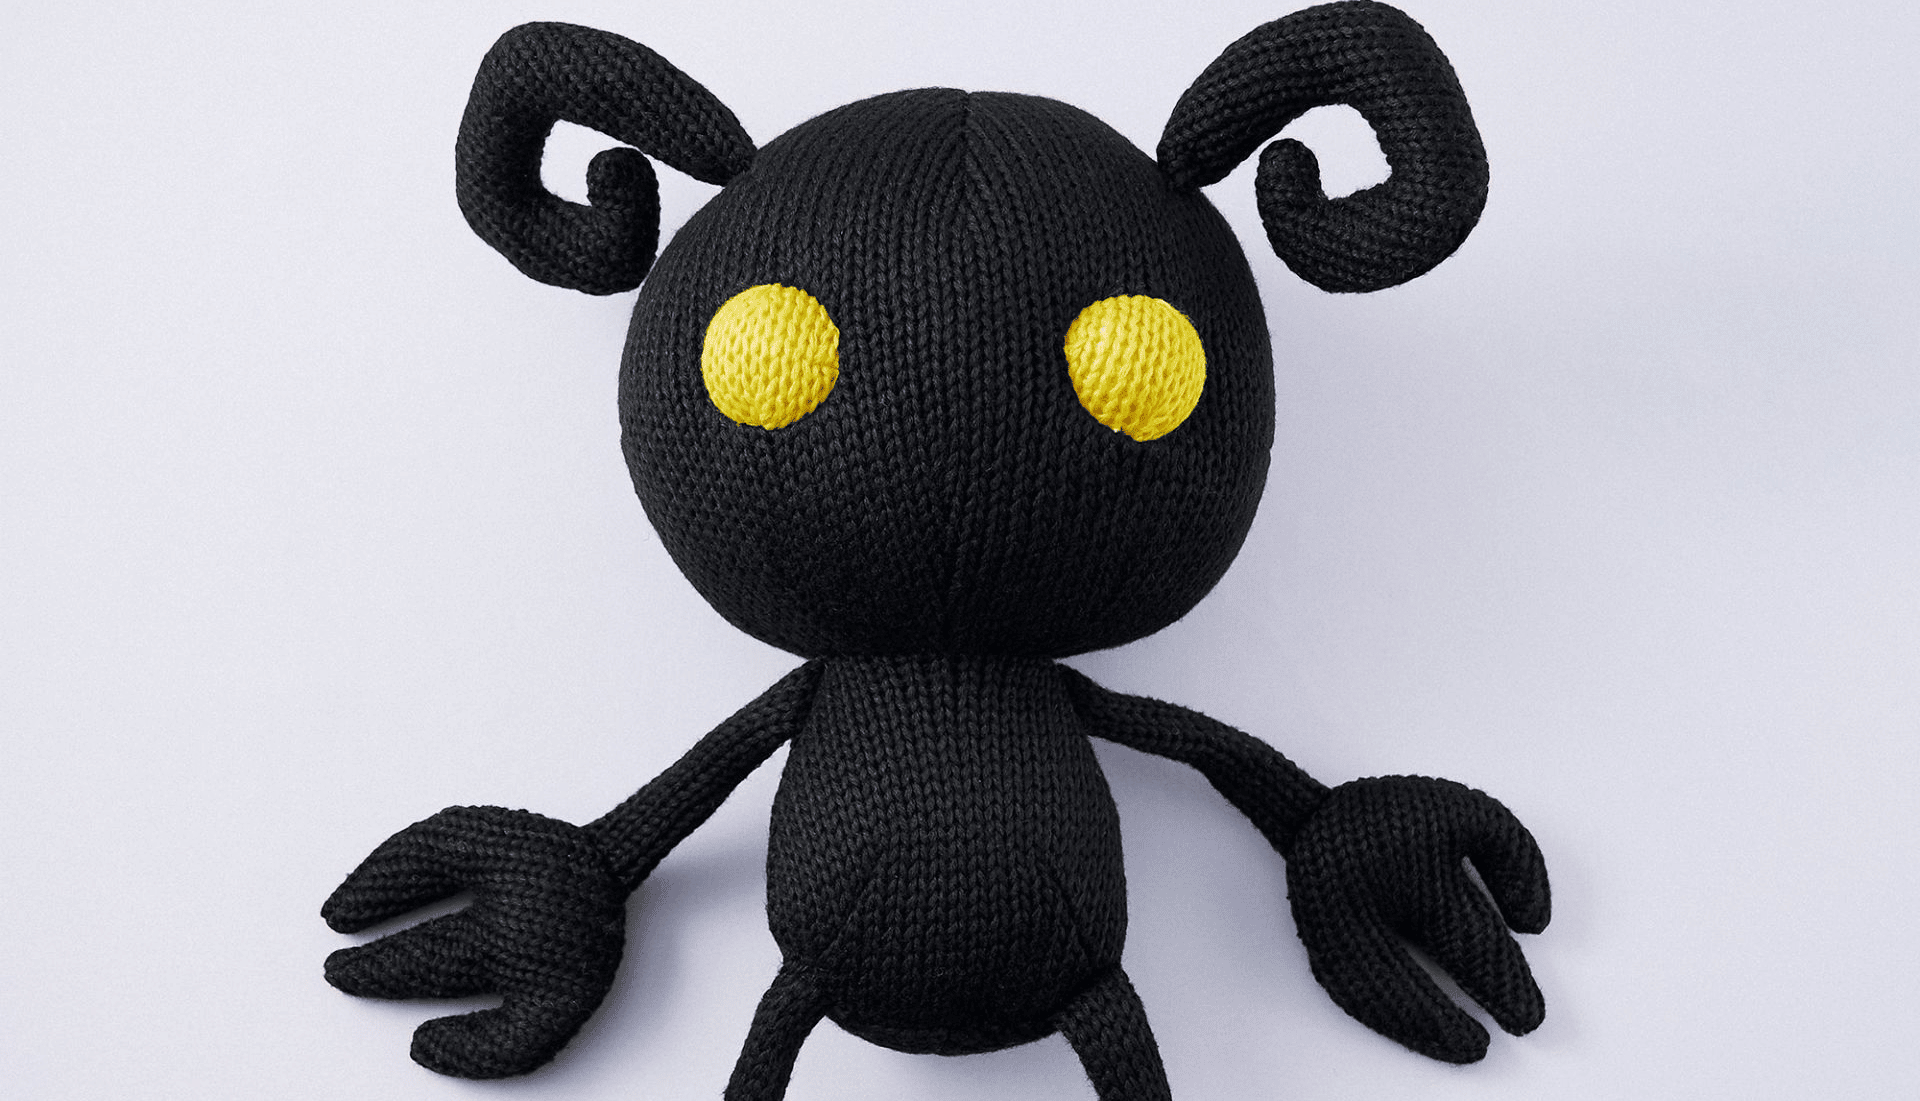 Kingdom Hearts Knitted Shadow Heartless Plush Available for Pre-Order